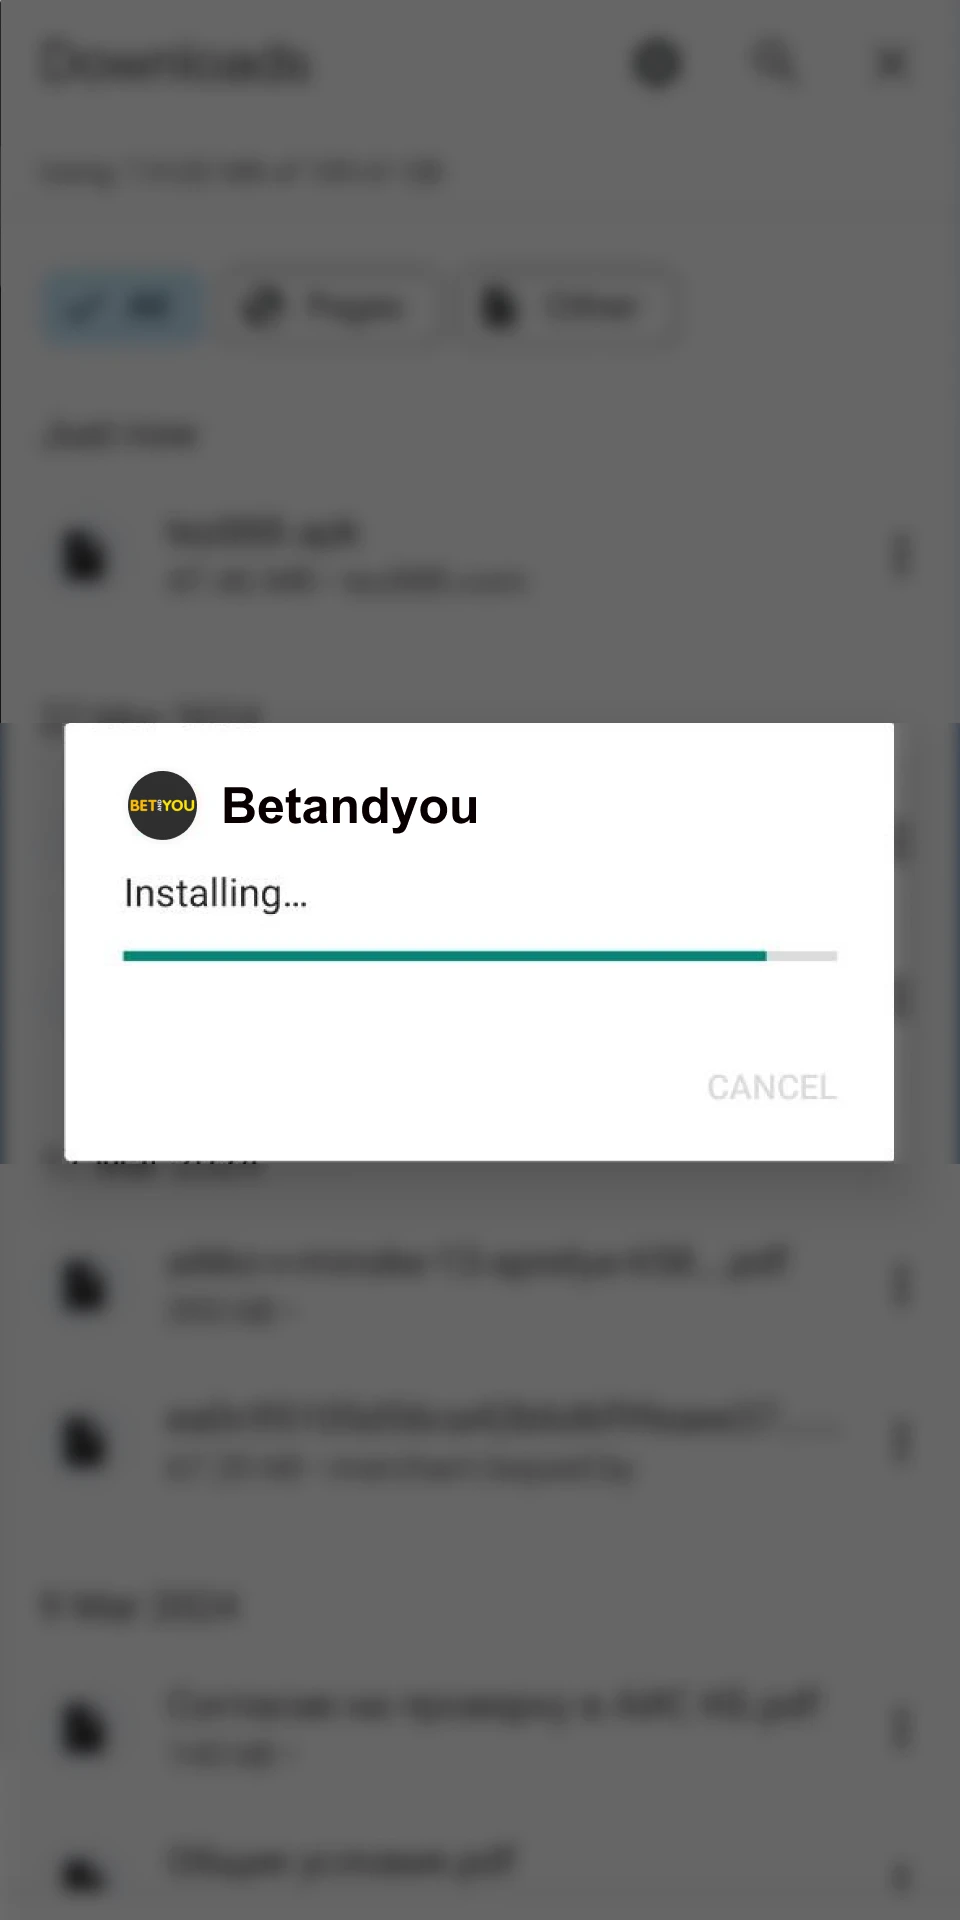 Install the Betandyou app on your phone.